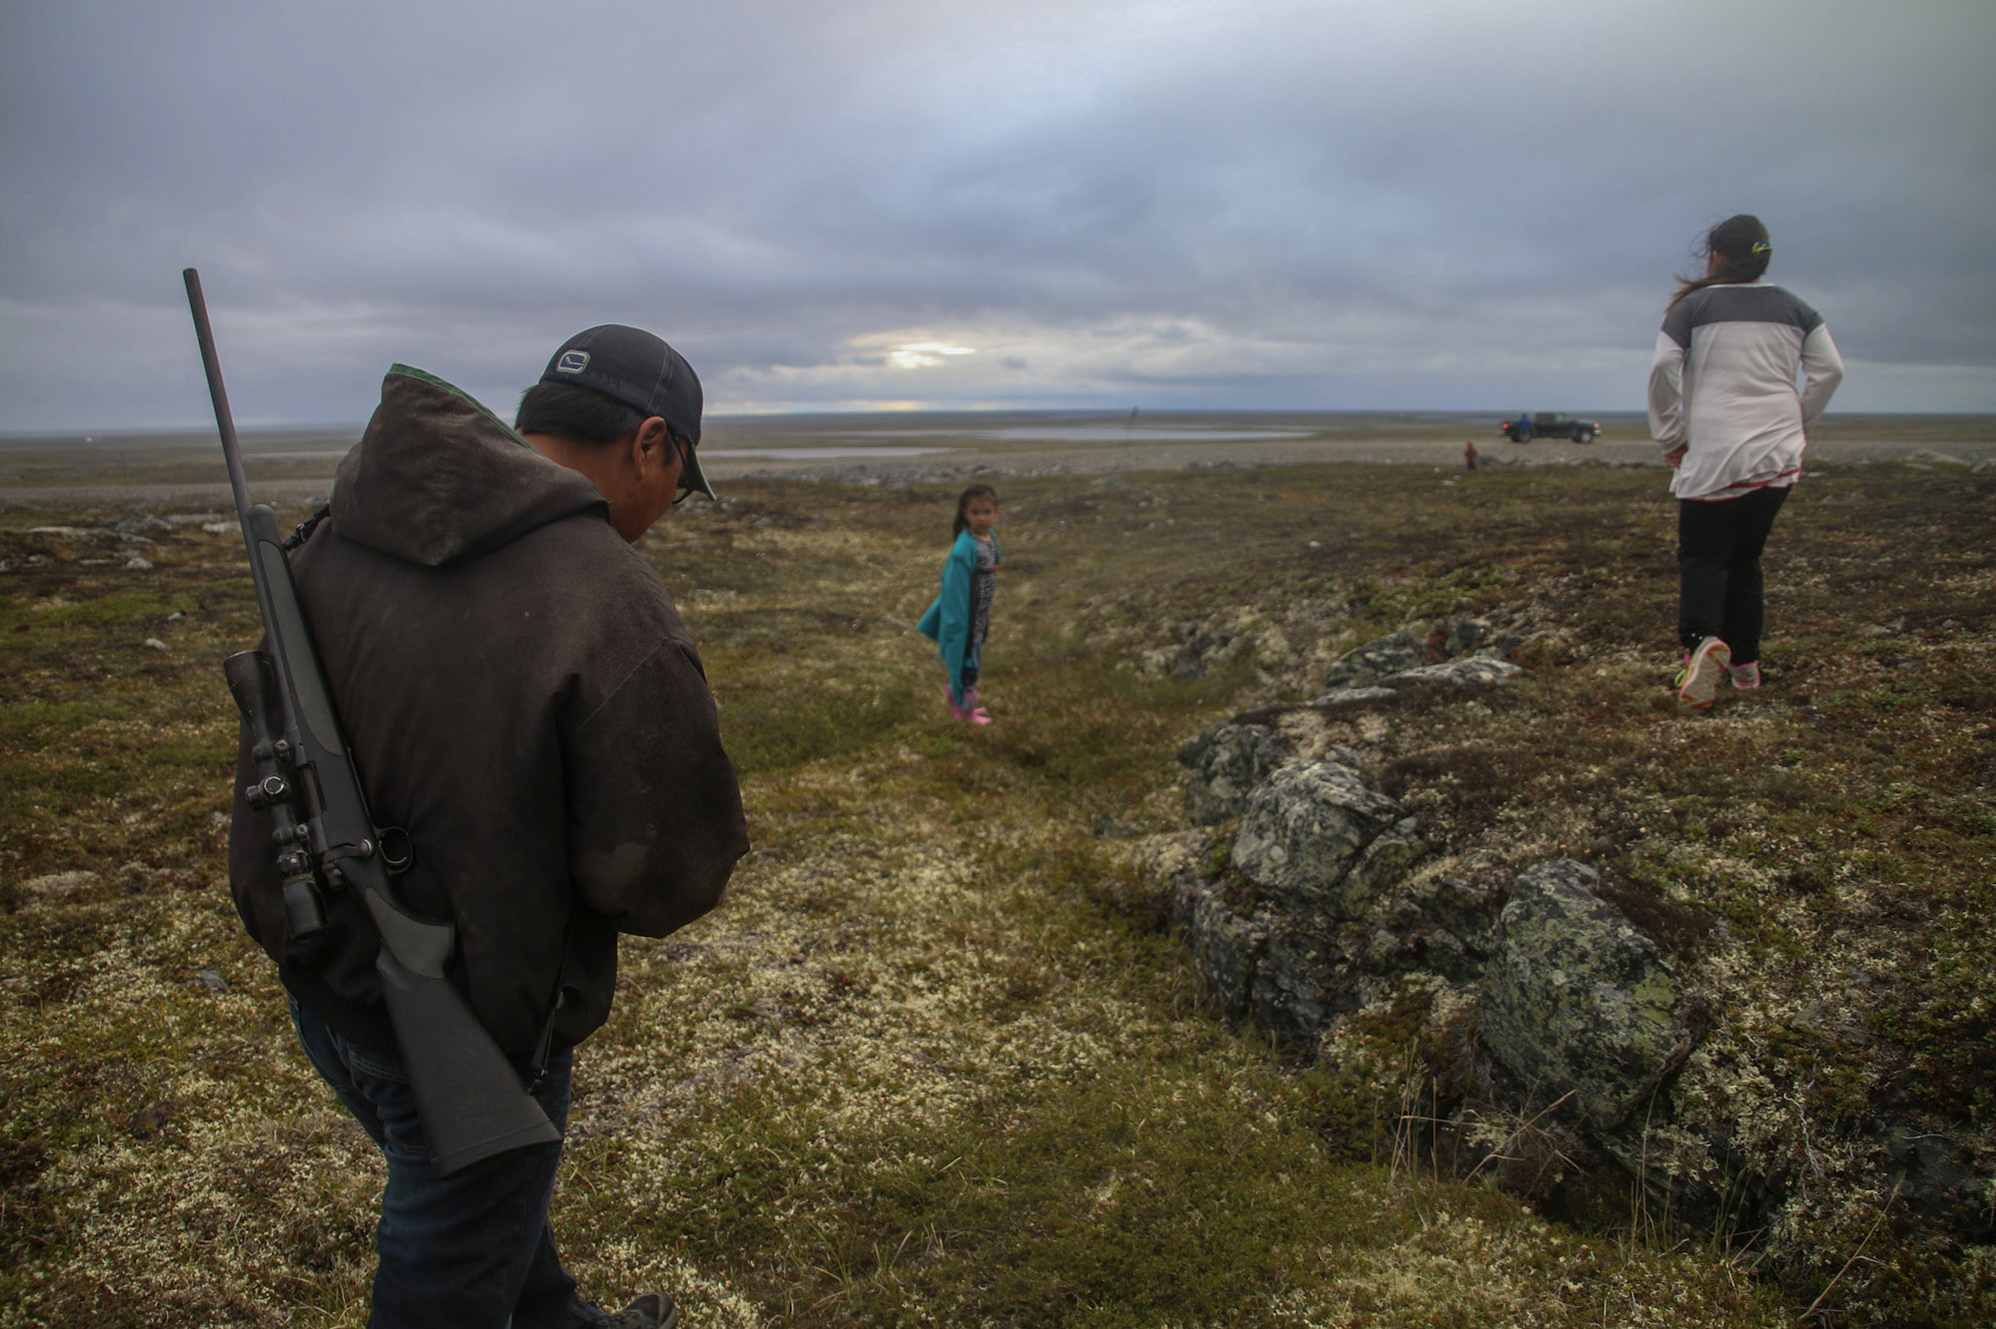 A man with a gun strapped to his back, a woman, and a young girl walking across a field toward a vehicle in the distance